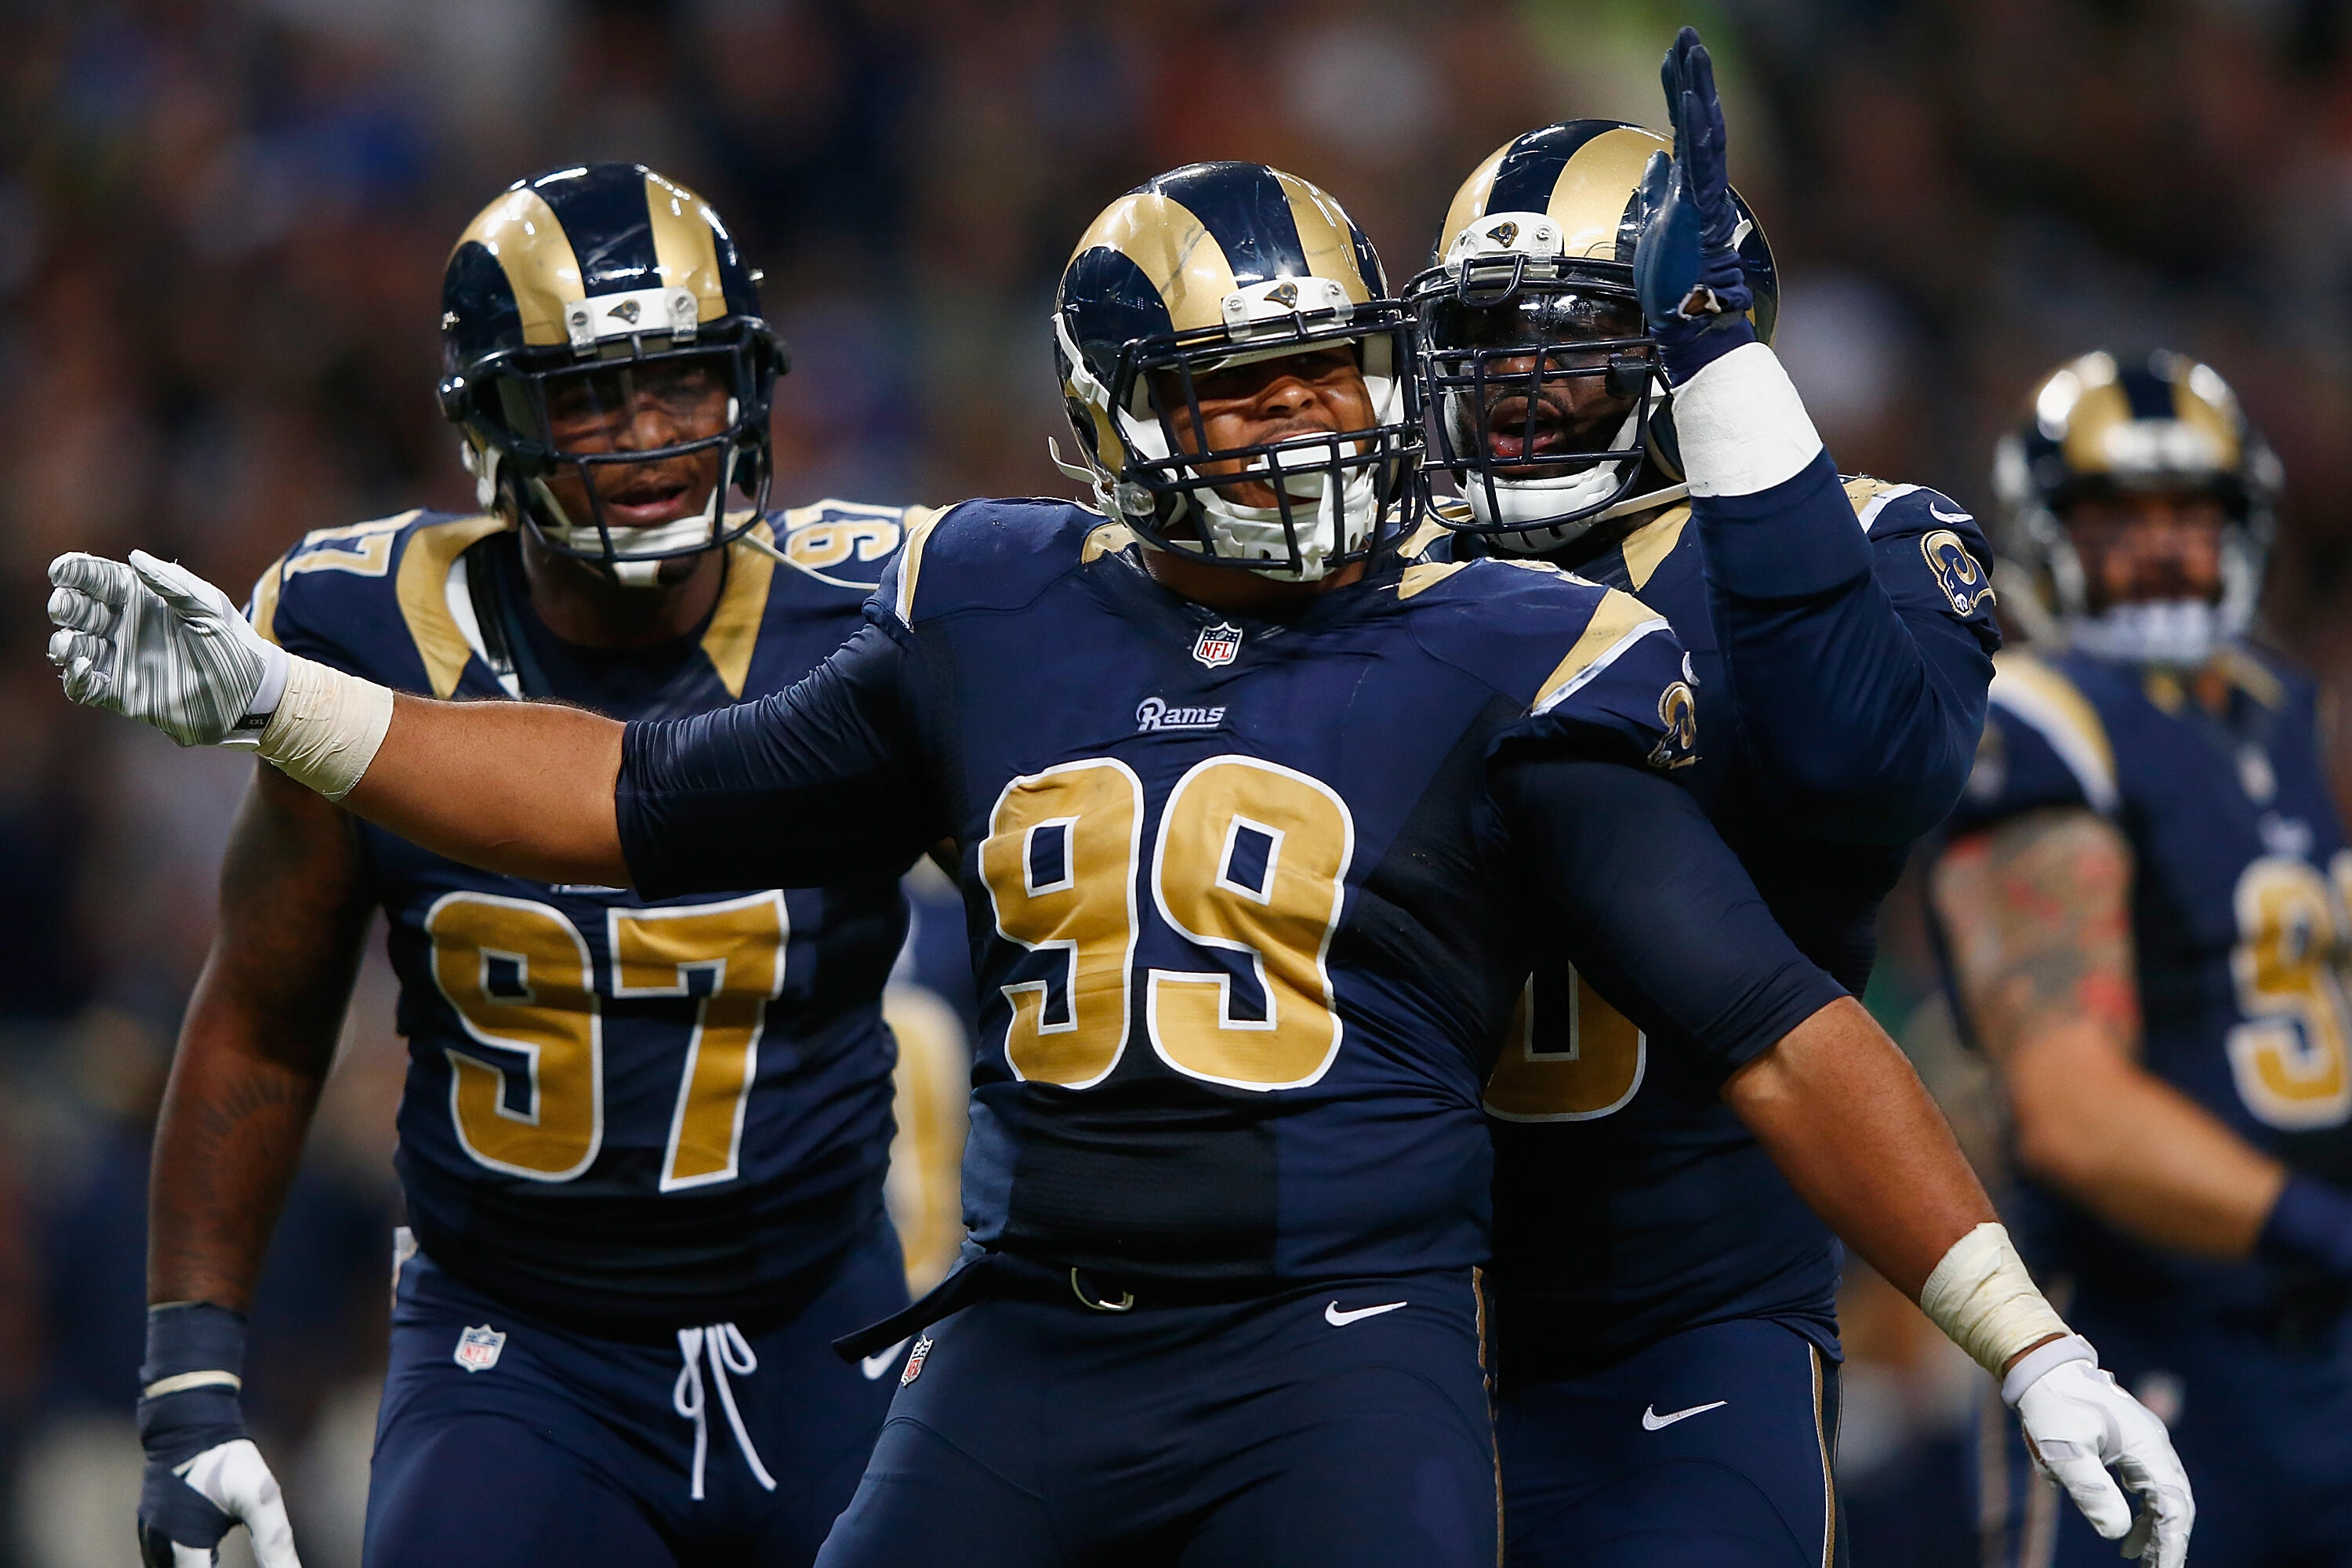 ST. LOUIS, MO - SEPTEMBER 13: Aaron Donald #99 of the St. Louis Rams celebrates a third quarter sack against the Seattle Seahawks at the Edward Jones Dome on September 13, 2015 in St. Louis, Missouri. (Photo by Jamie Squire/Getty Images)